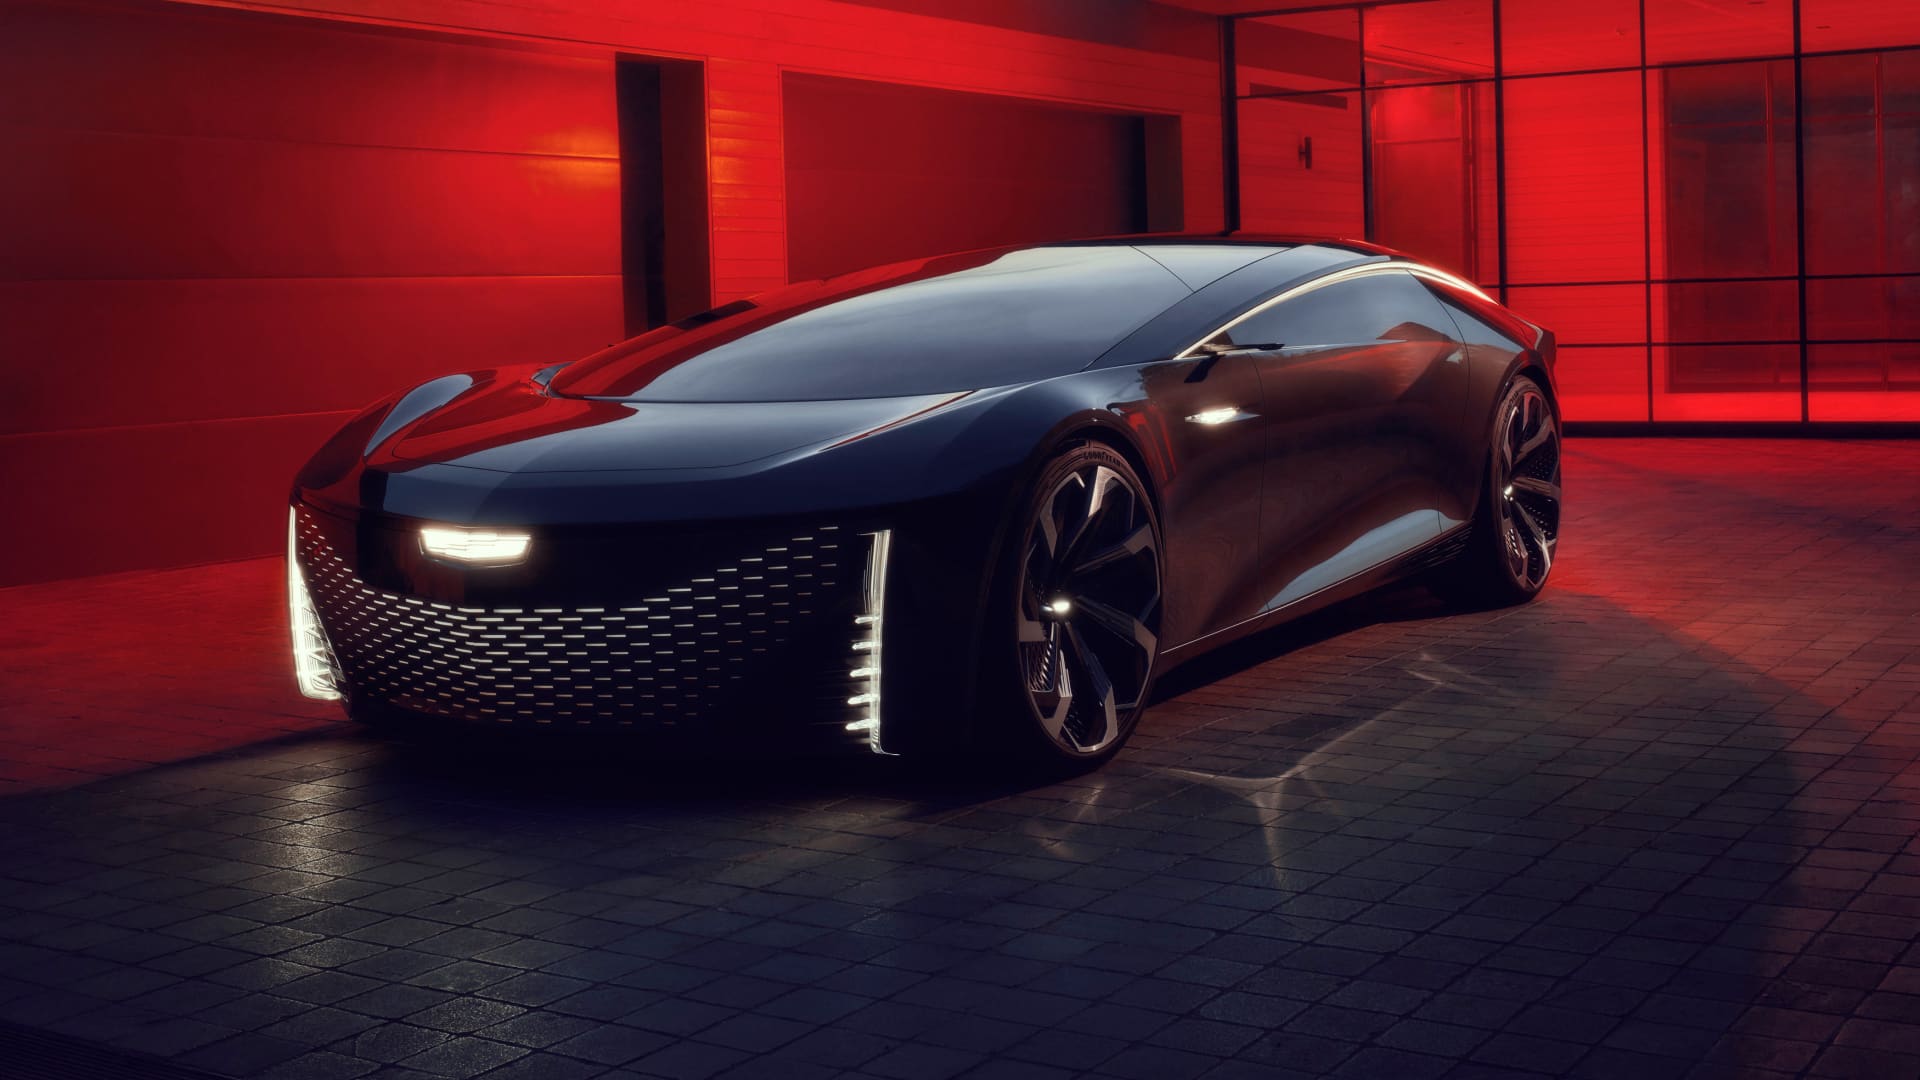 Cadillac InnerSpace concept